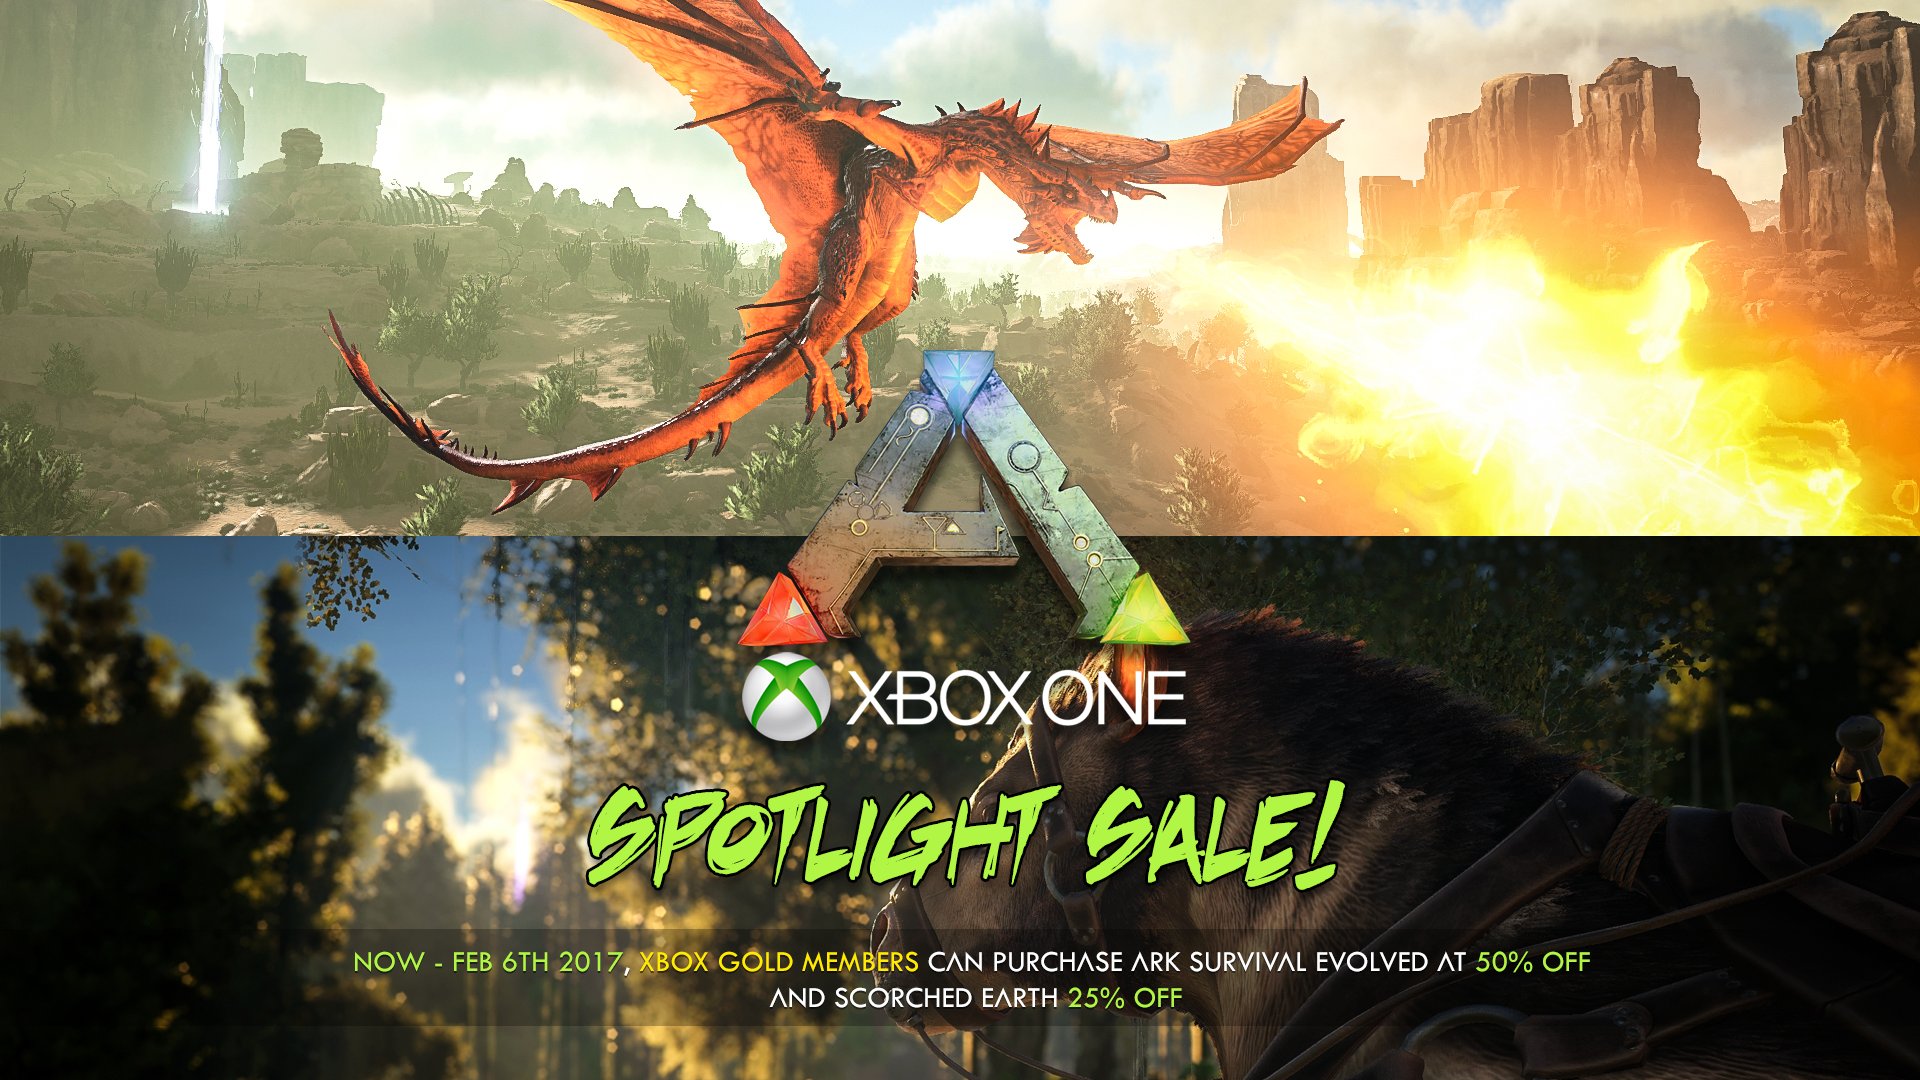 Ark survival earth. Ark Xbox. Ark Xbox one sale. Scorched Earth игра. Ark Survival Evolved Scorched Earth.